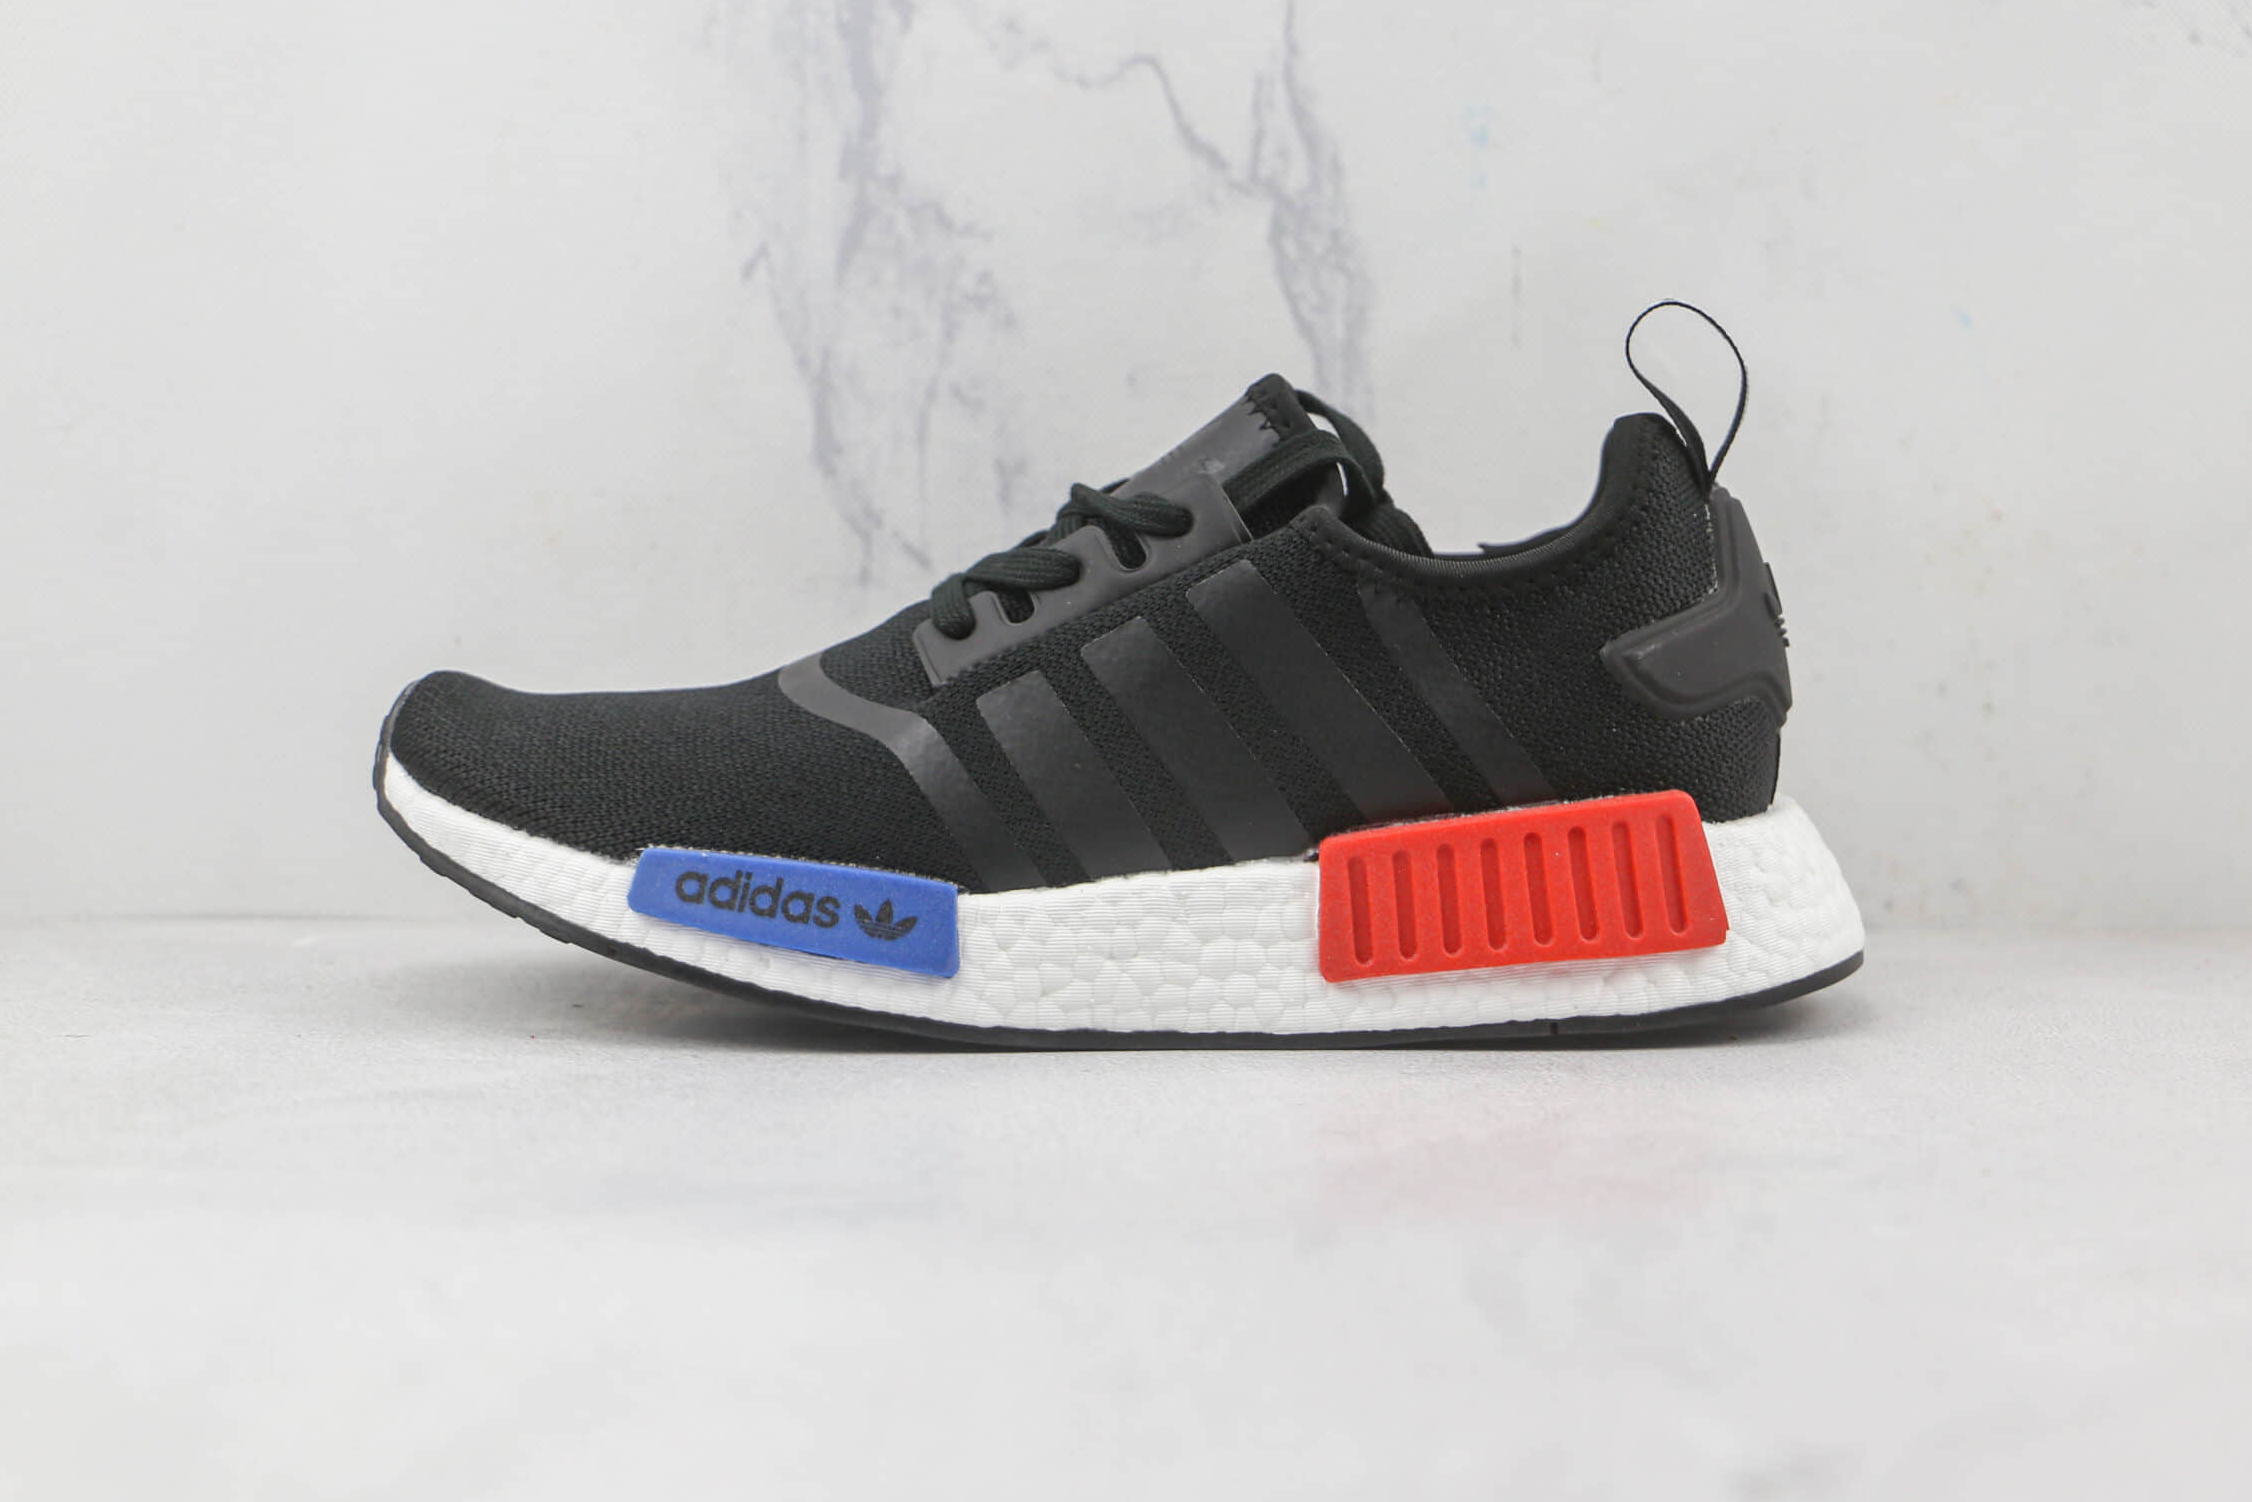 Adidas NMD_R1 'Black OG' GZ7922 - Stylish Sneakers for Ultimate Comfort.